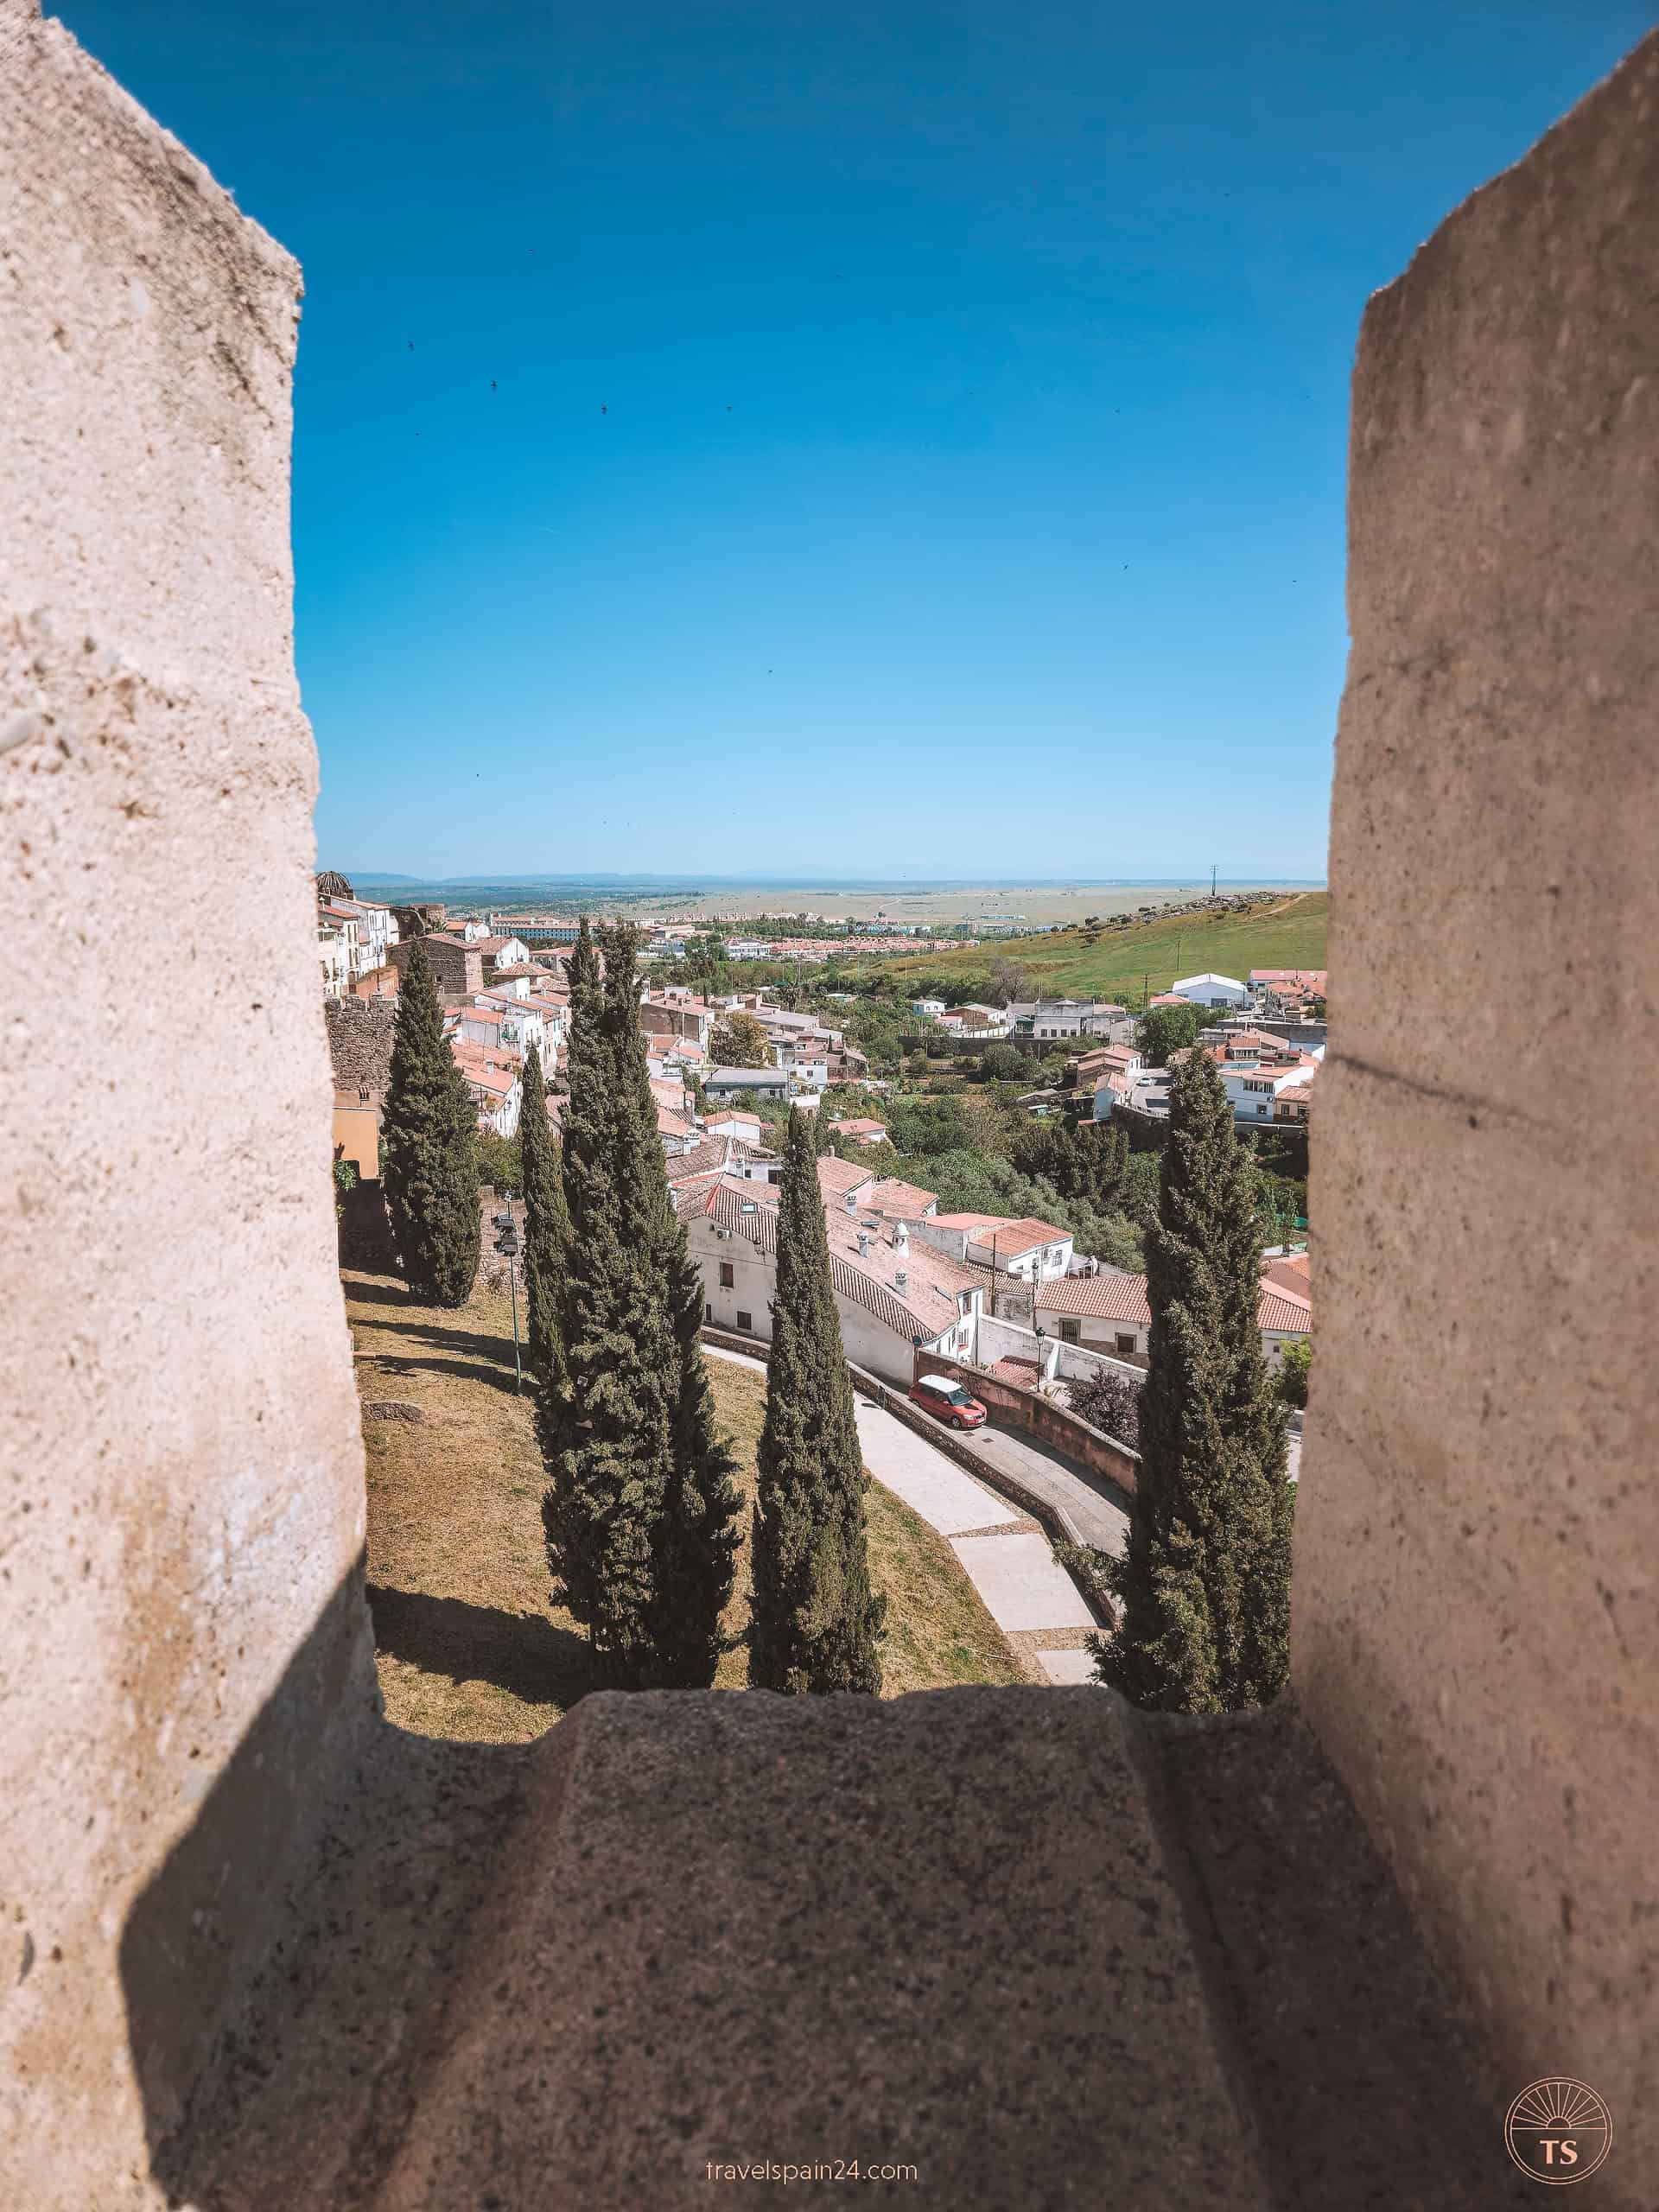 Panoramic view from atop the Baluarte de los Pozos, part of the old Jewish quarter in Cáceres, highlighting the medieval fortifications that once protected the city.